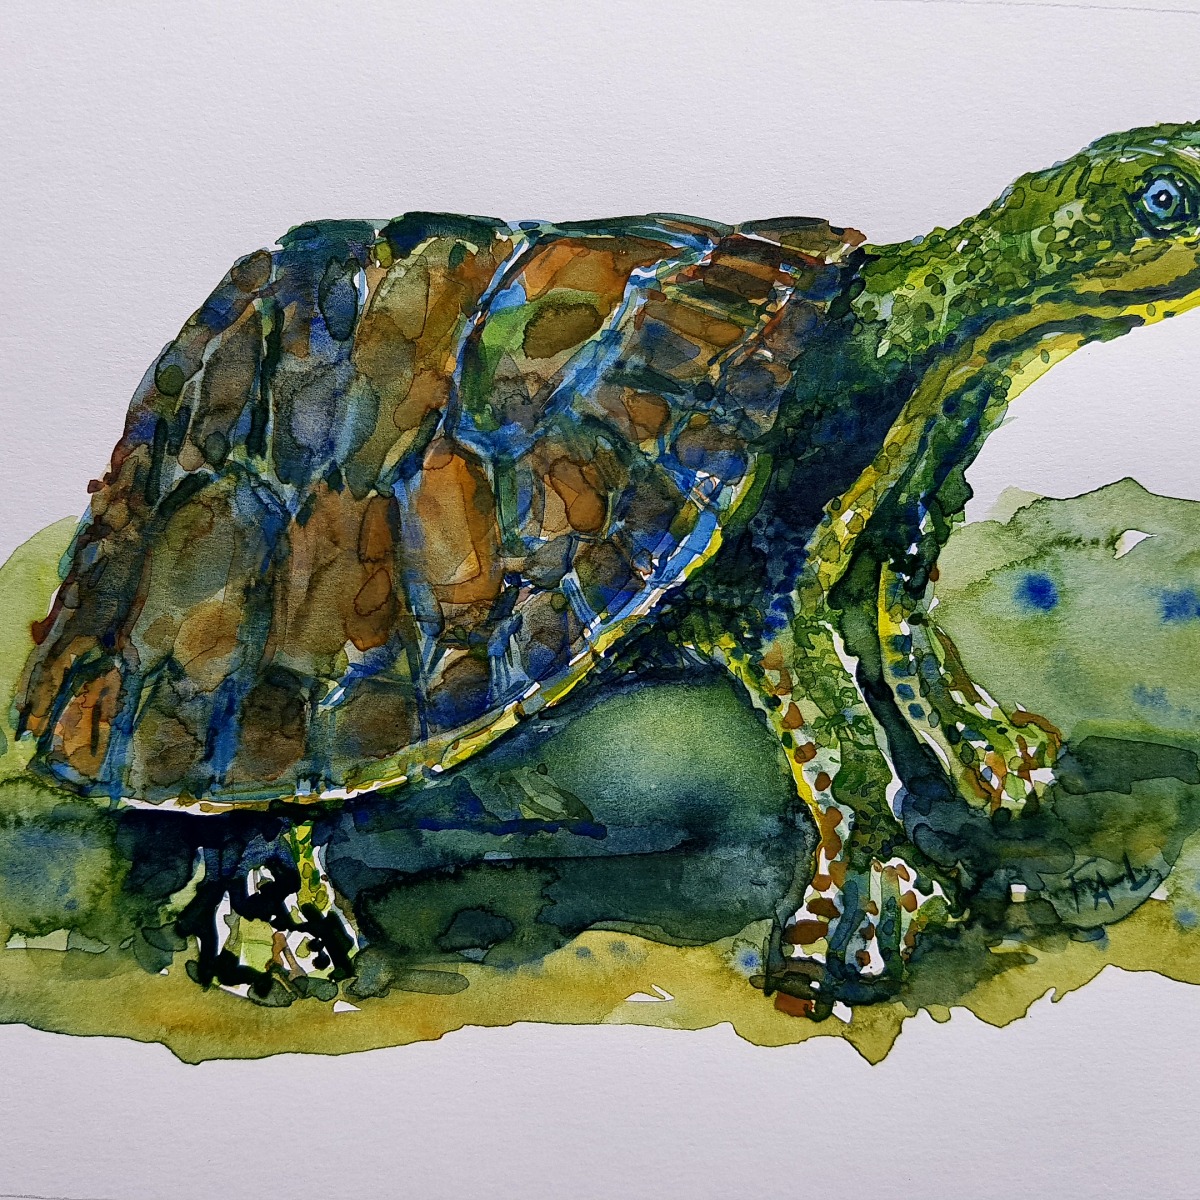 Watercolour of turtle, painting by Frits Ahlefeldt